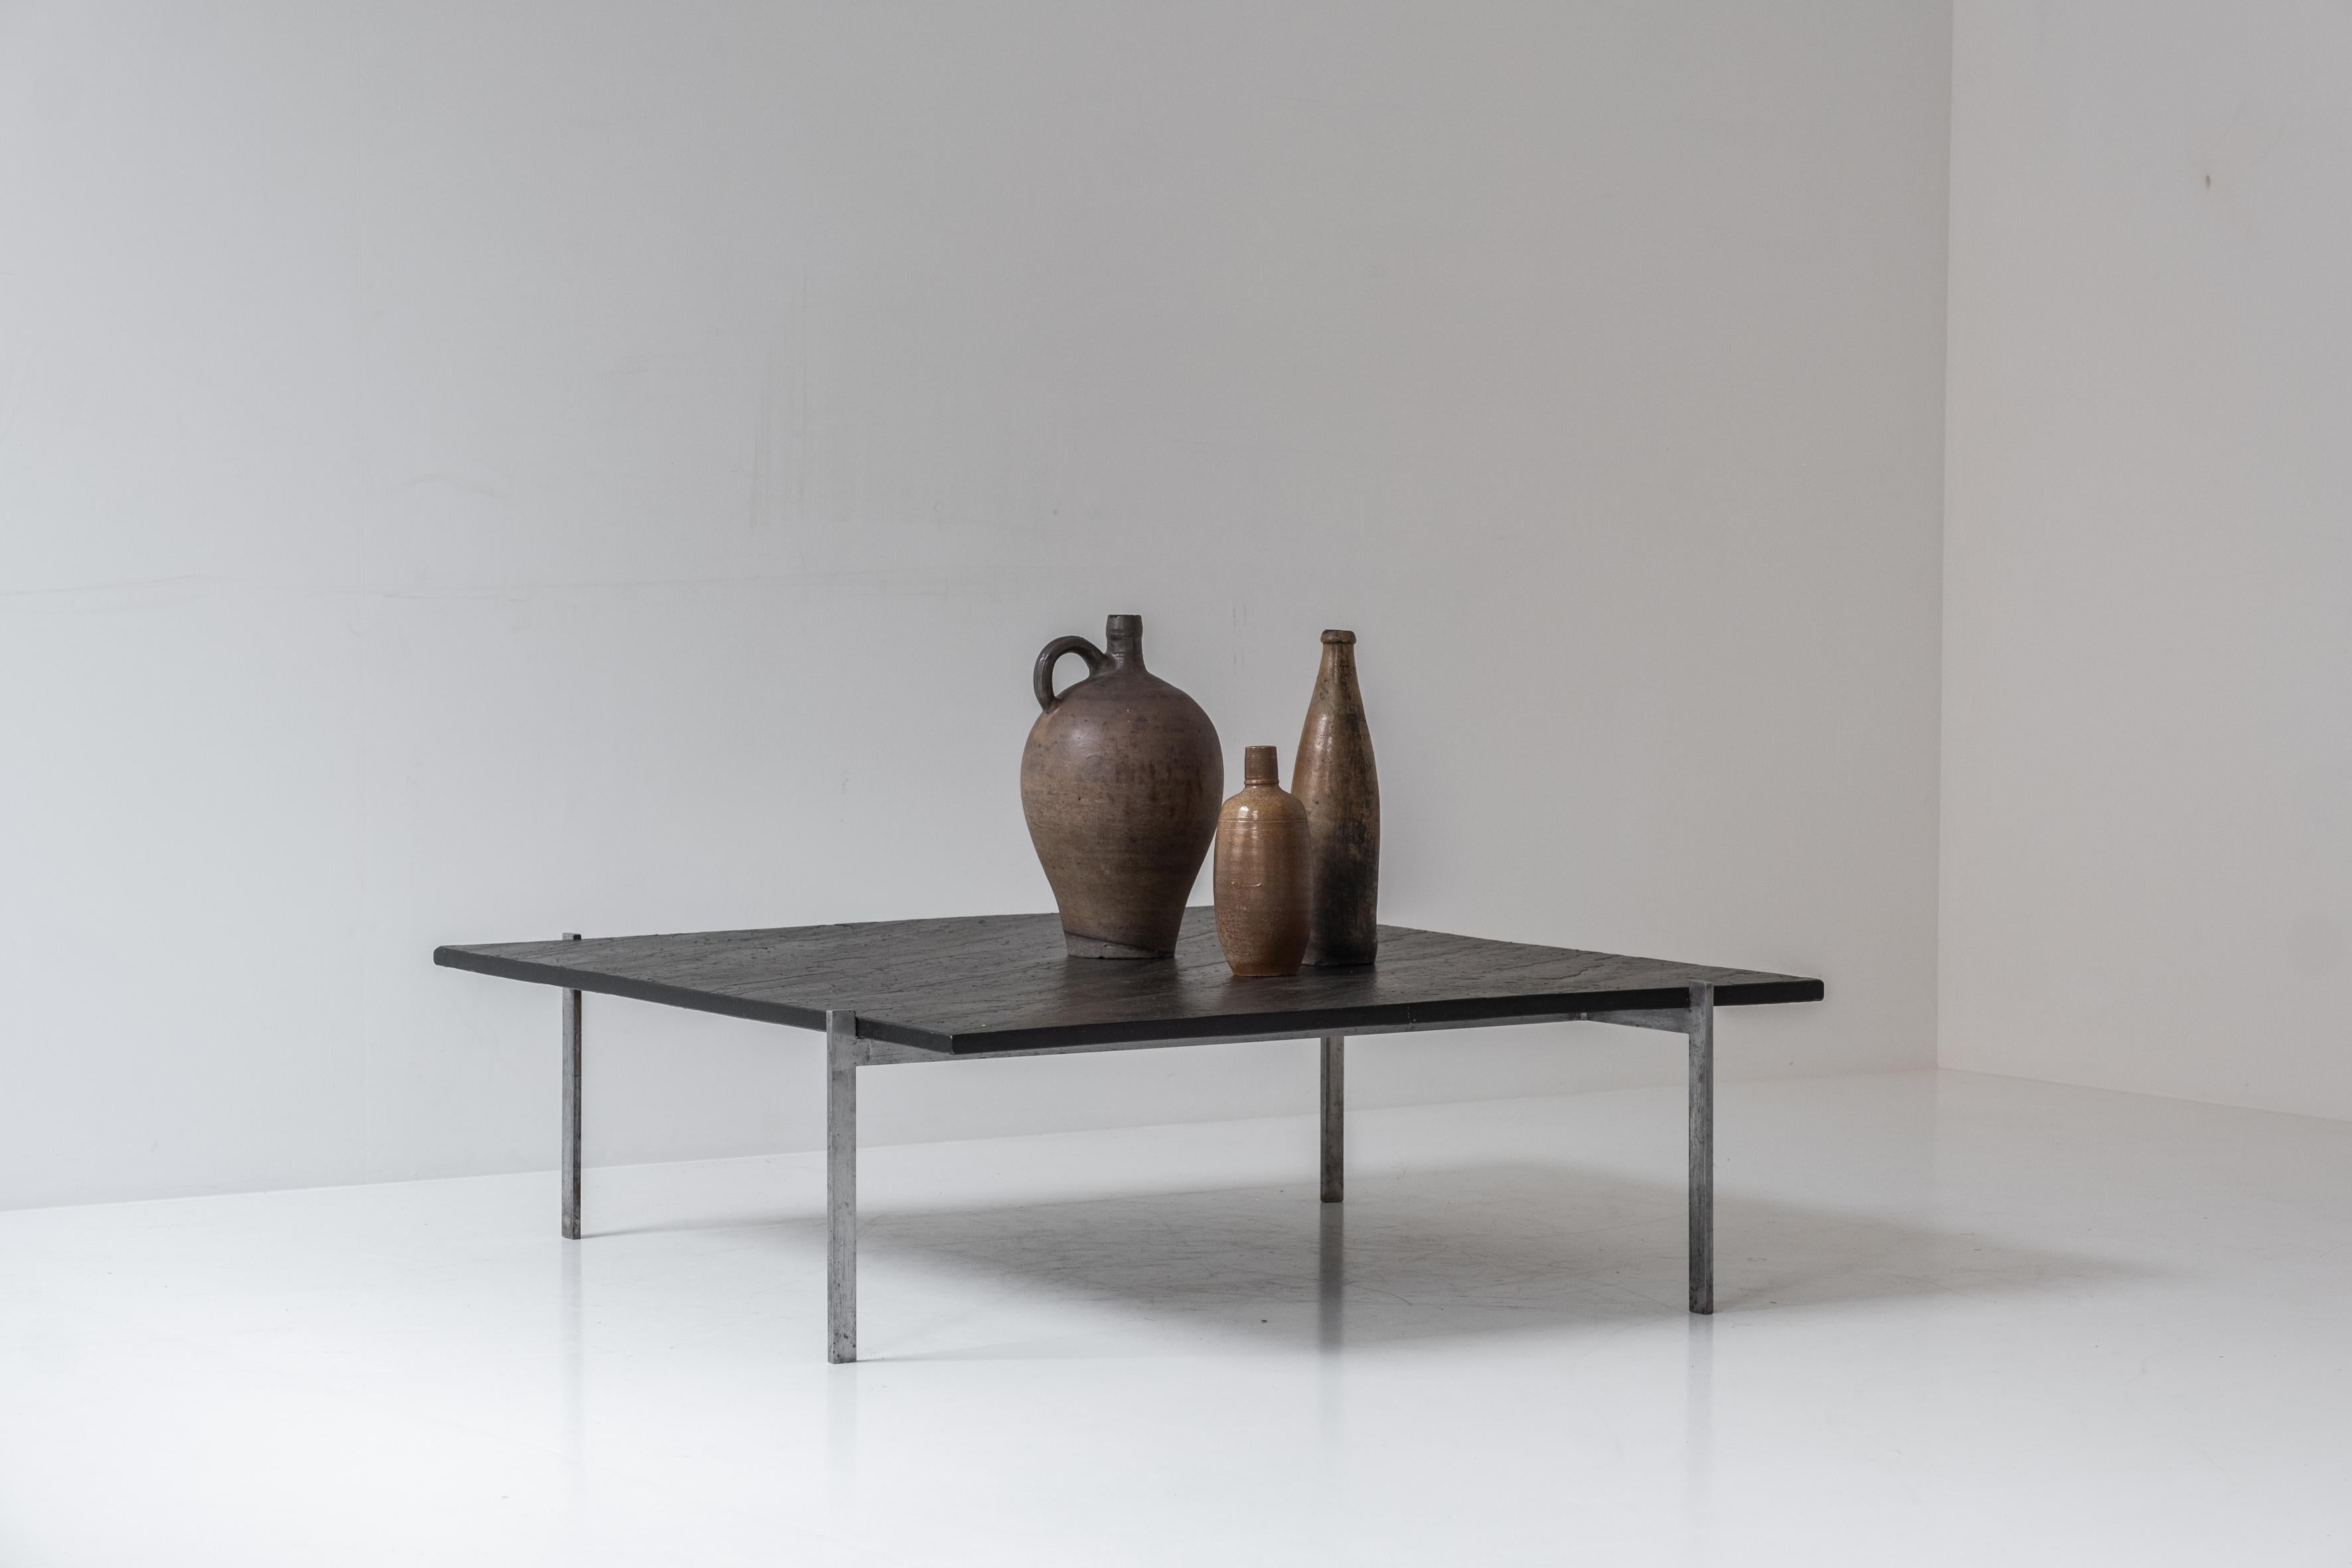 Square slate stone coffee table from the 1950s. The base features a chrome plated steel frame and the top is made out of a black slate stone. This table is similar to the famous PK61 by Poul Kjaerholm, but has other dimensions. Probably a unique